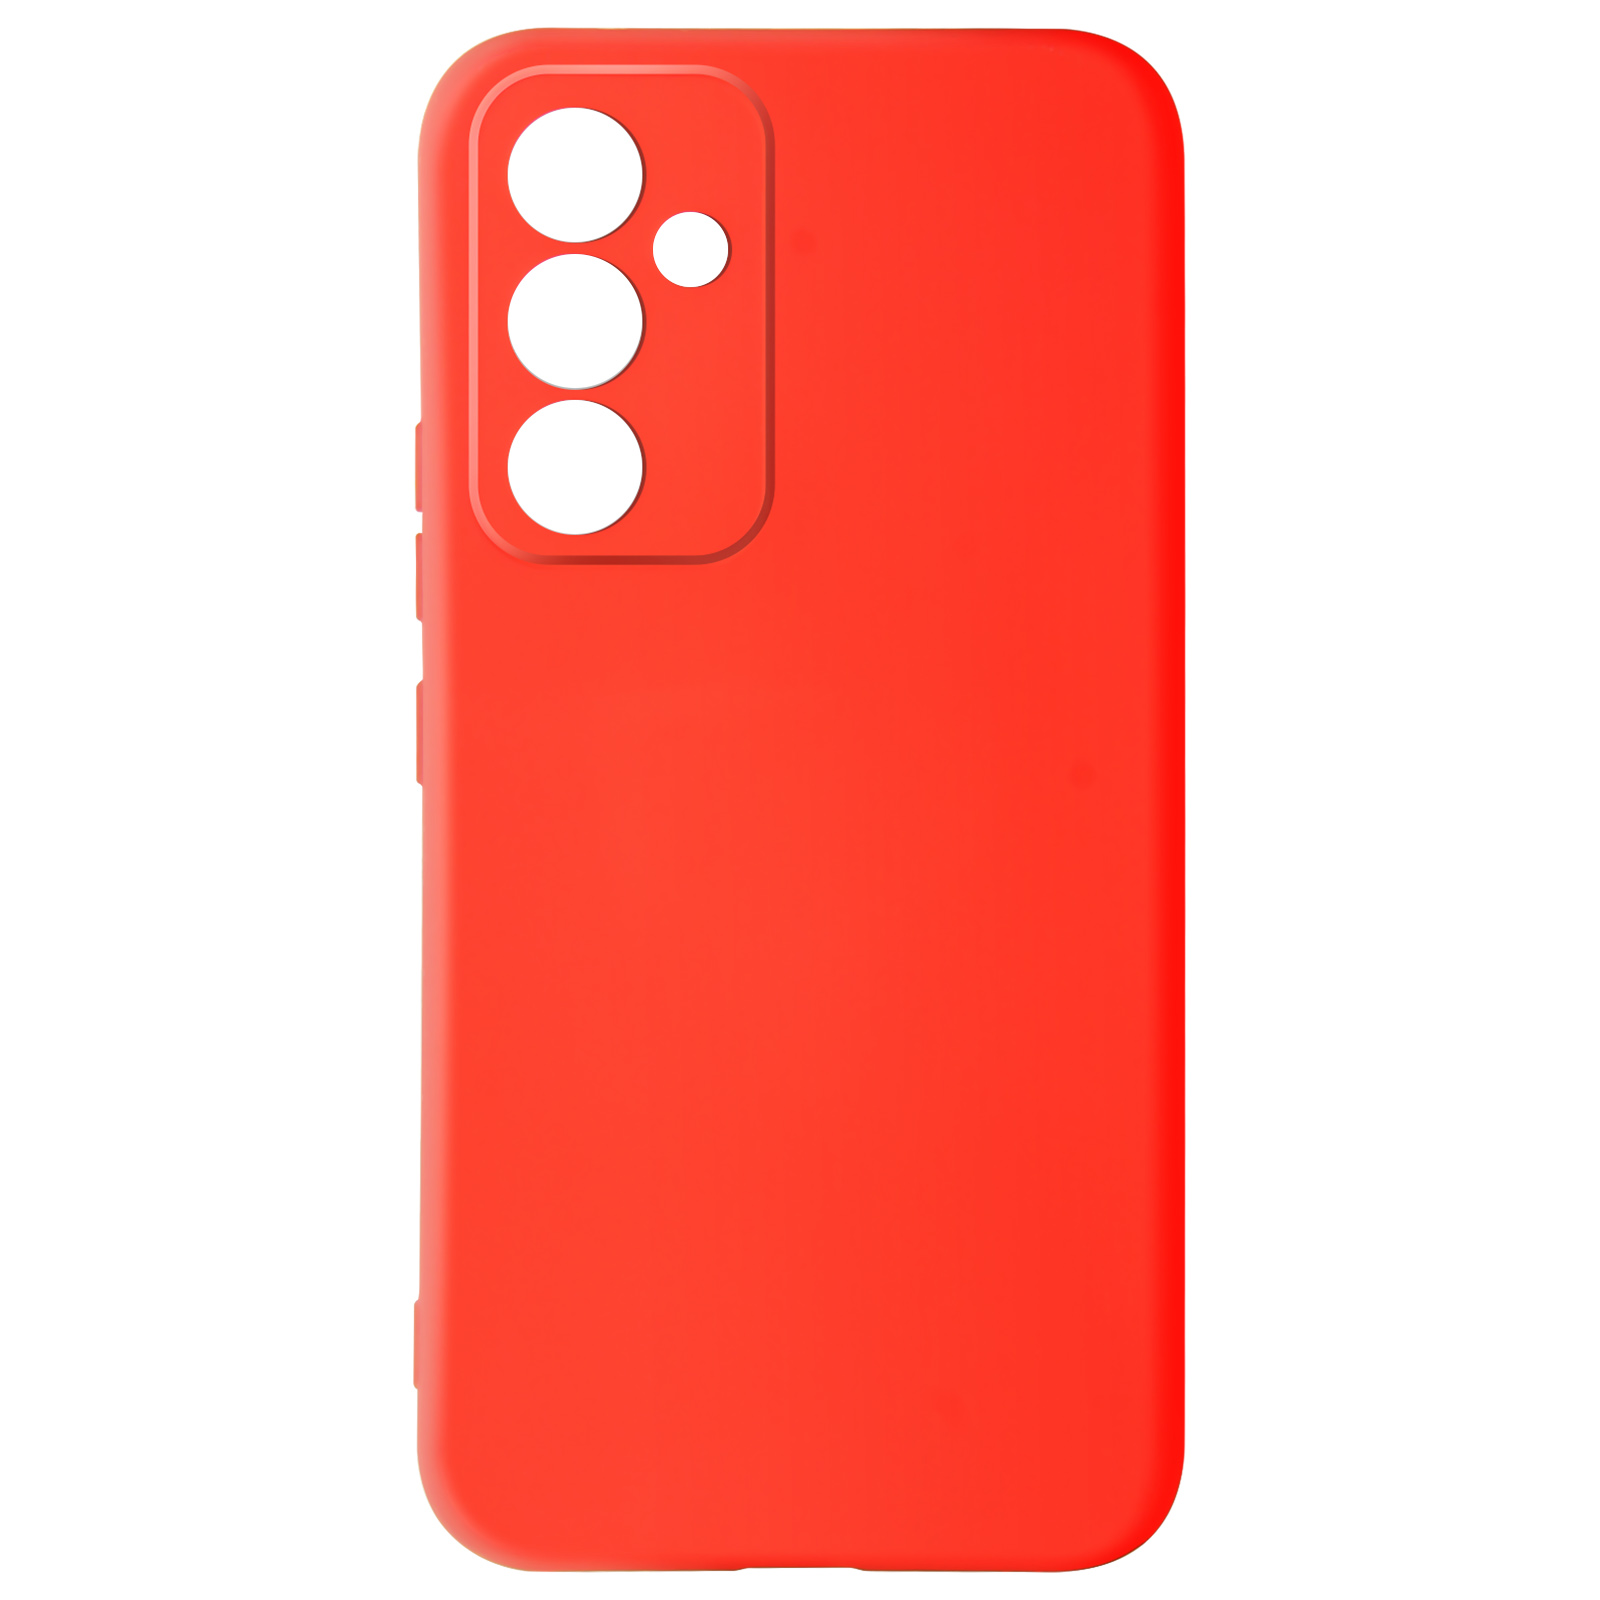 AVIZAR Soft Touch Galaxy Backcover, 5G, A34 Series, Rot Samsung